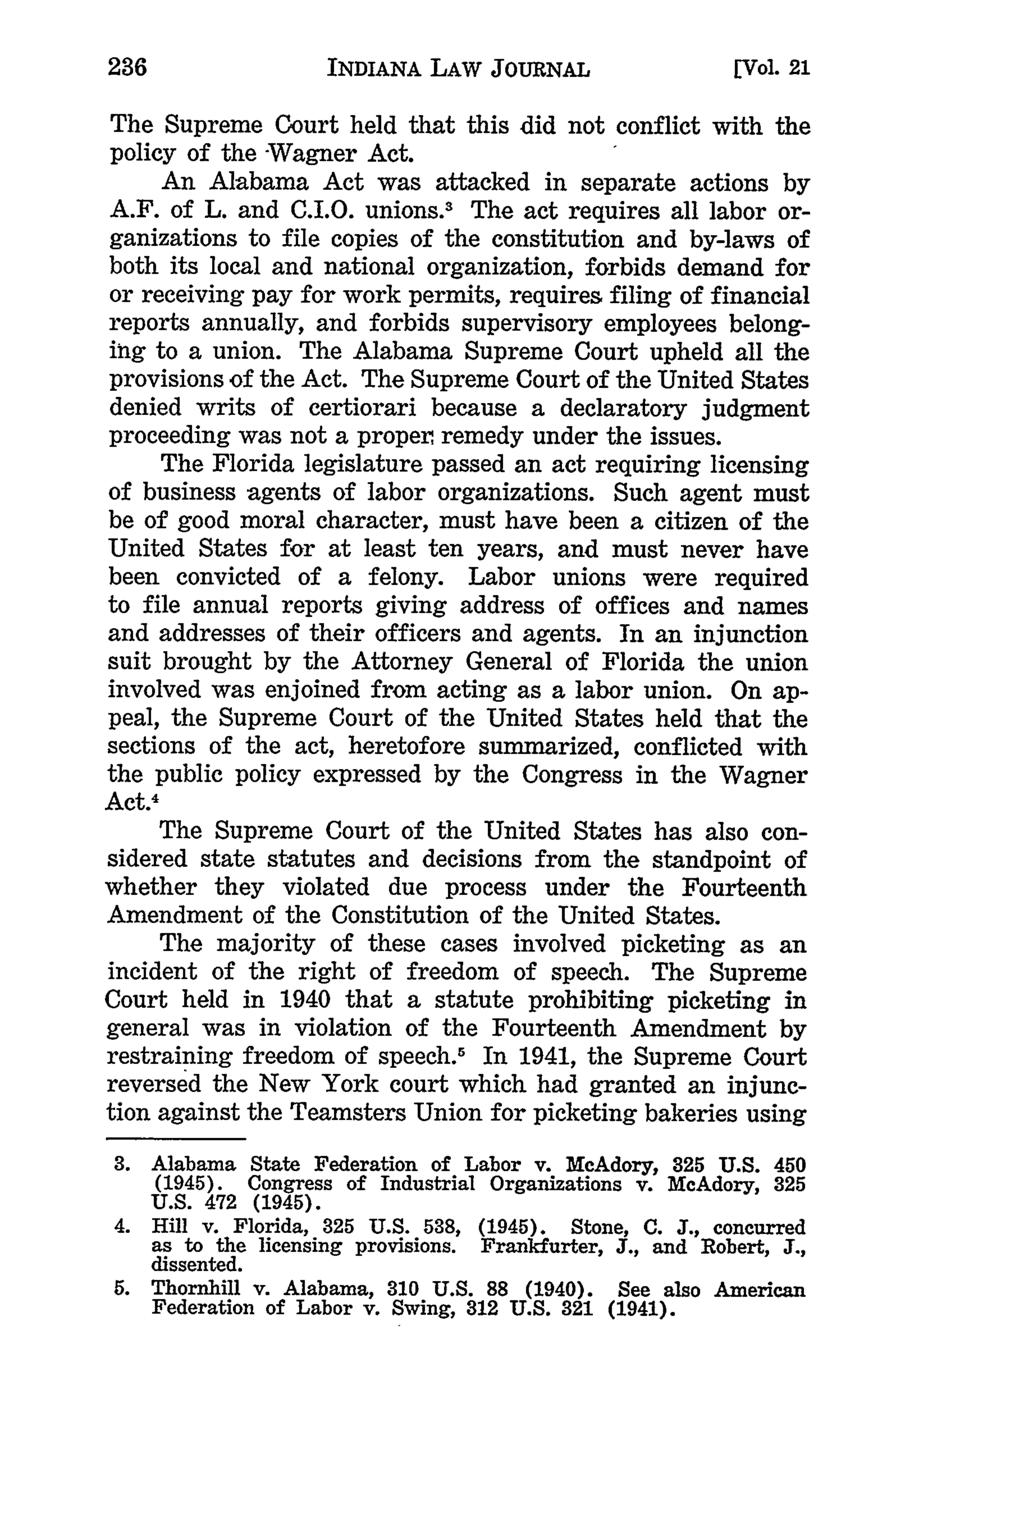 INDIANA LAW JOURNAL [Vol. 21 The Supreme Court held that this did not conflict with the policy of the -Wagner Act. An Alabama Act was attacked in separate actions by A.F. of L. and C.I.O. unions.